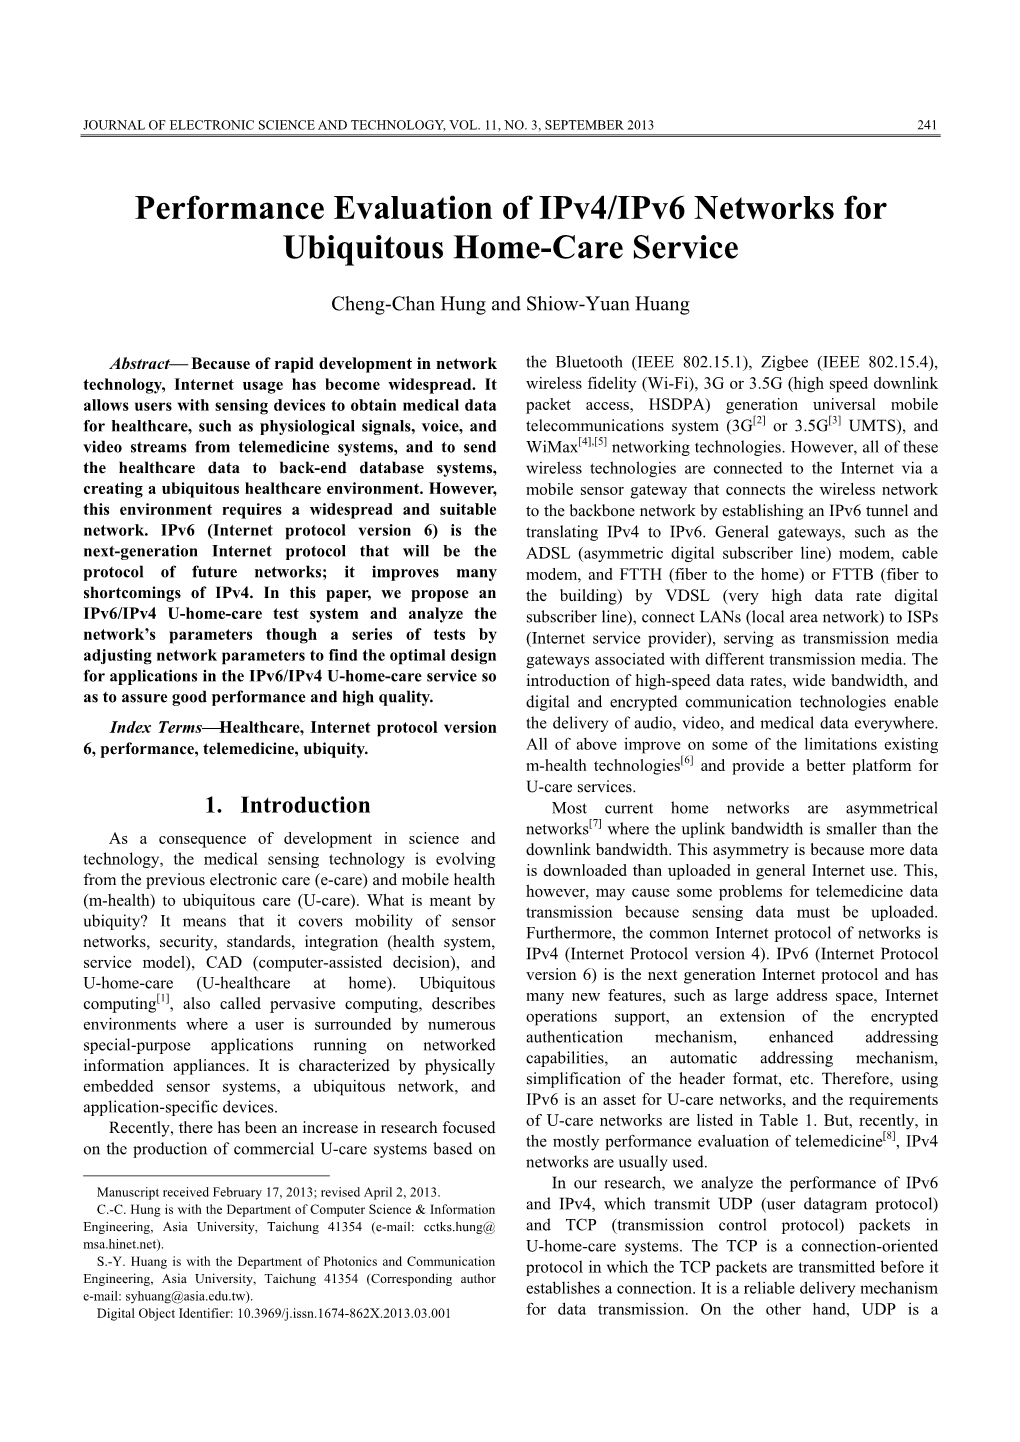 Performance Evaluation of Ipv4/Ipv6 Networks for Ubiquitous Home-Care Service